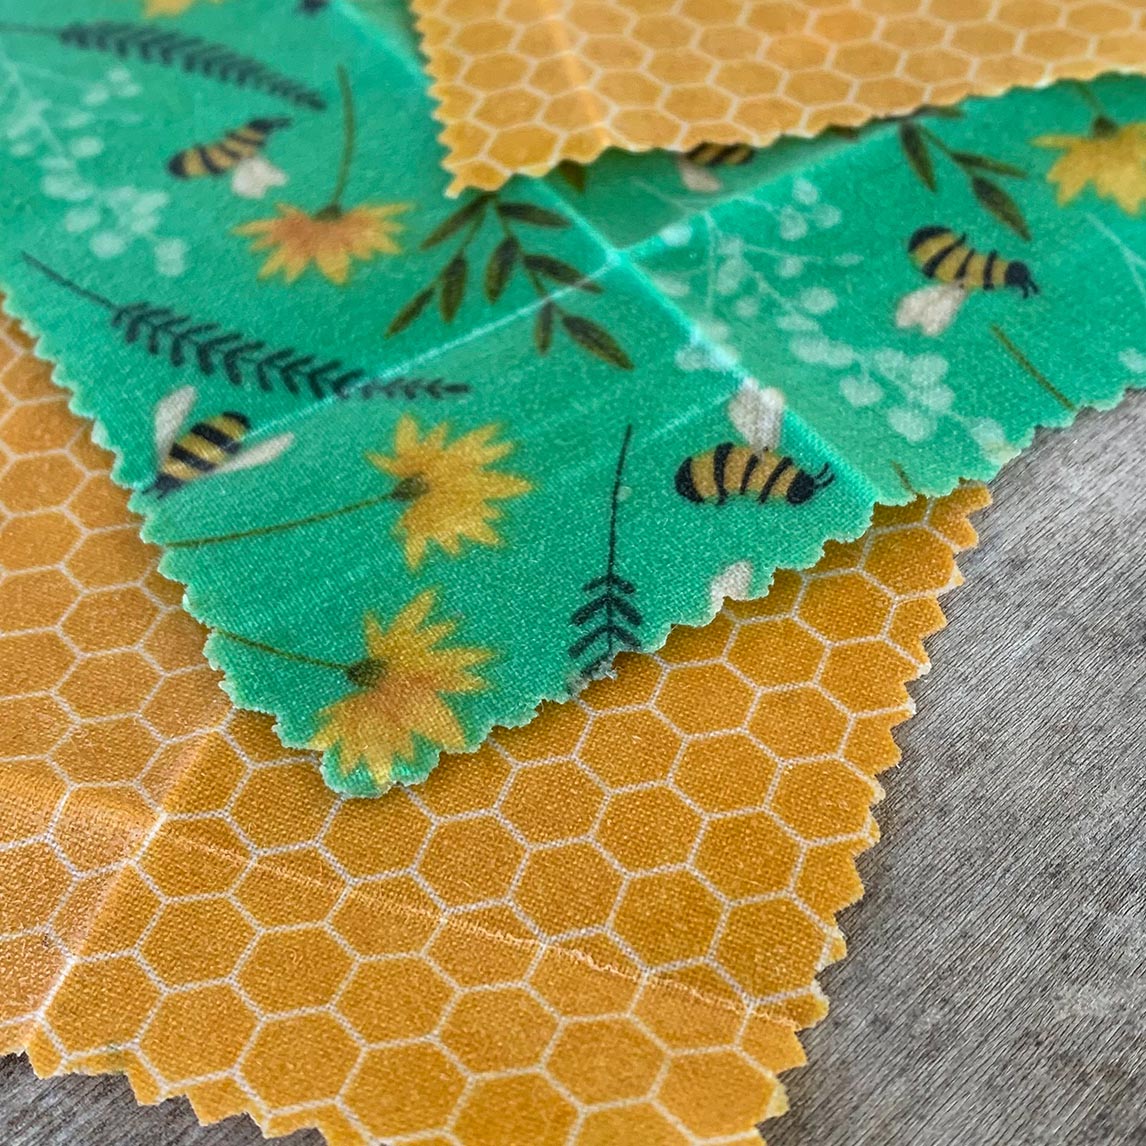 Assorted Beeswax Wraps - 3 Sizes